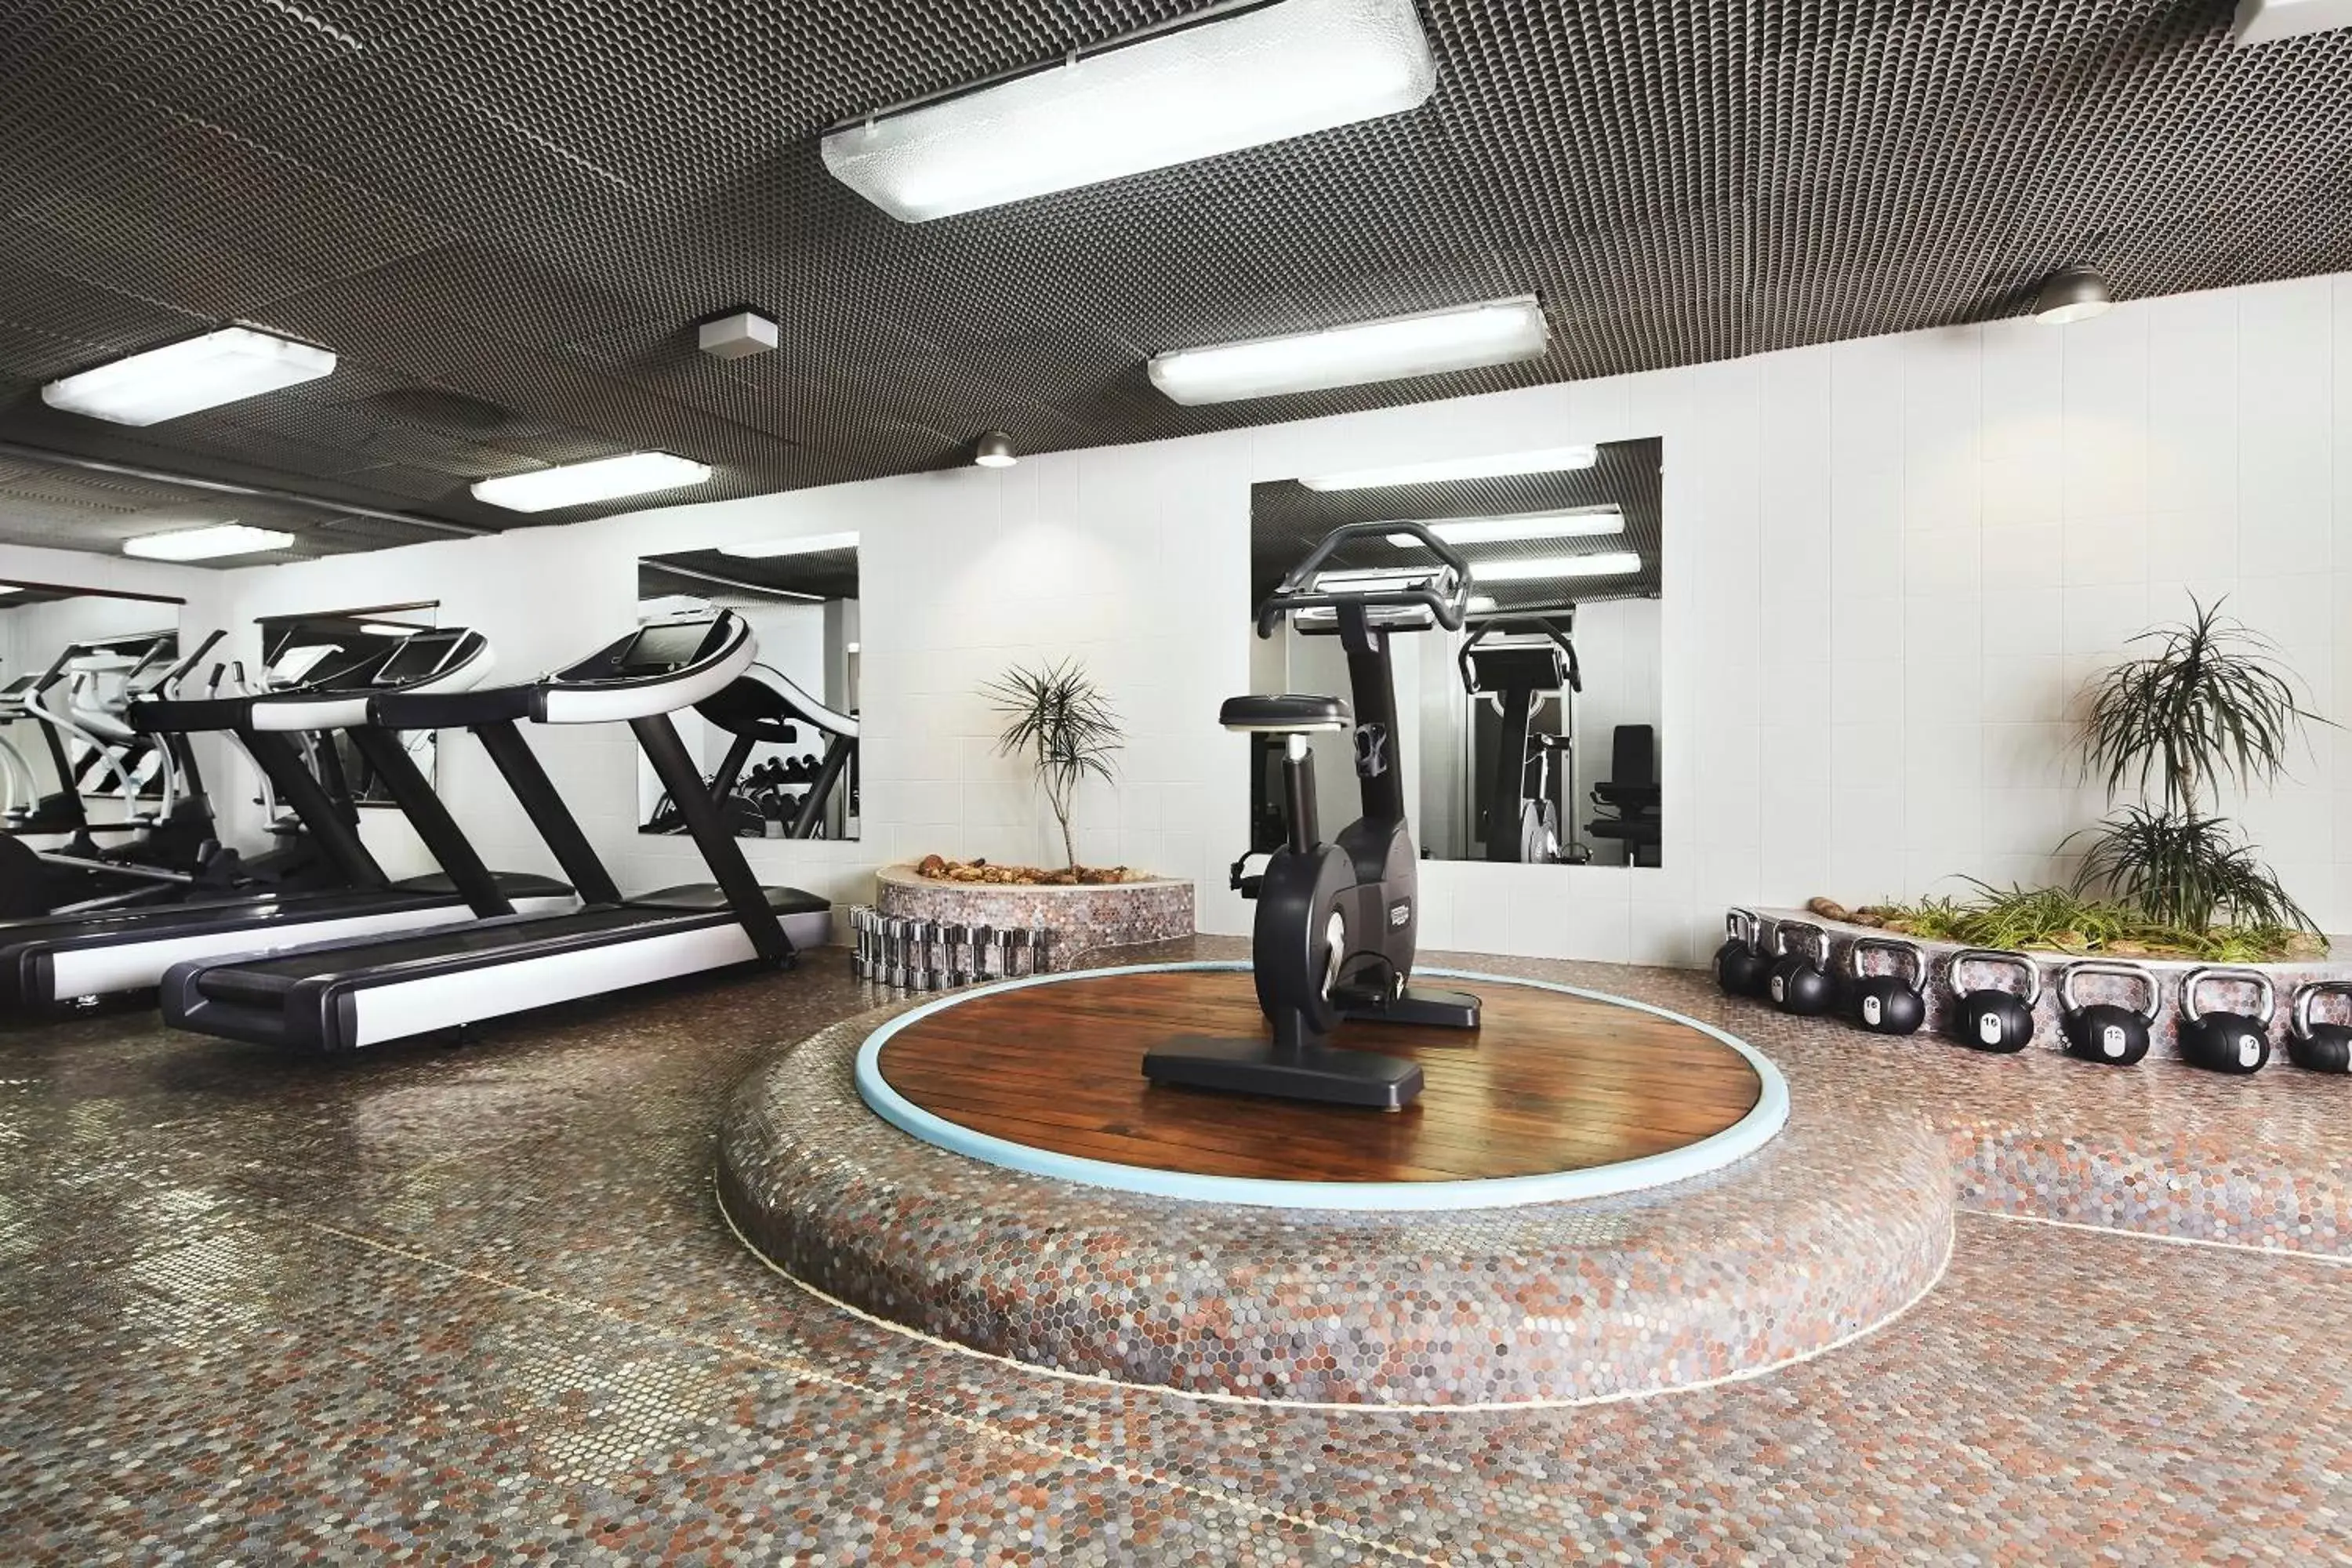 Fitness centre/facilities in Sofia Balkan Palace